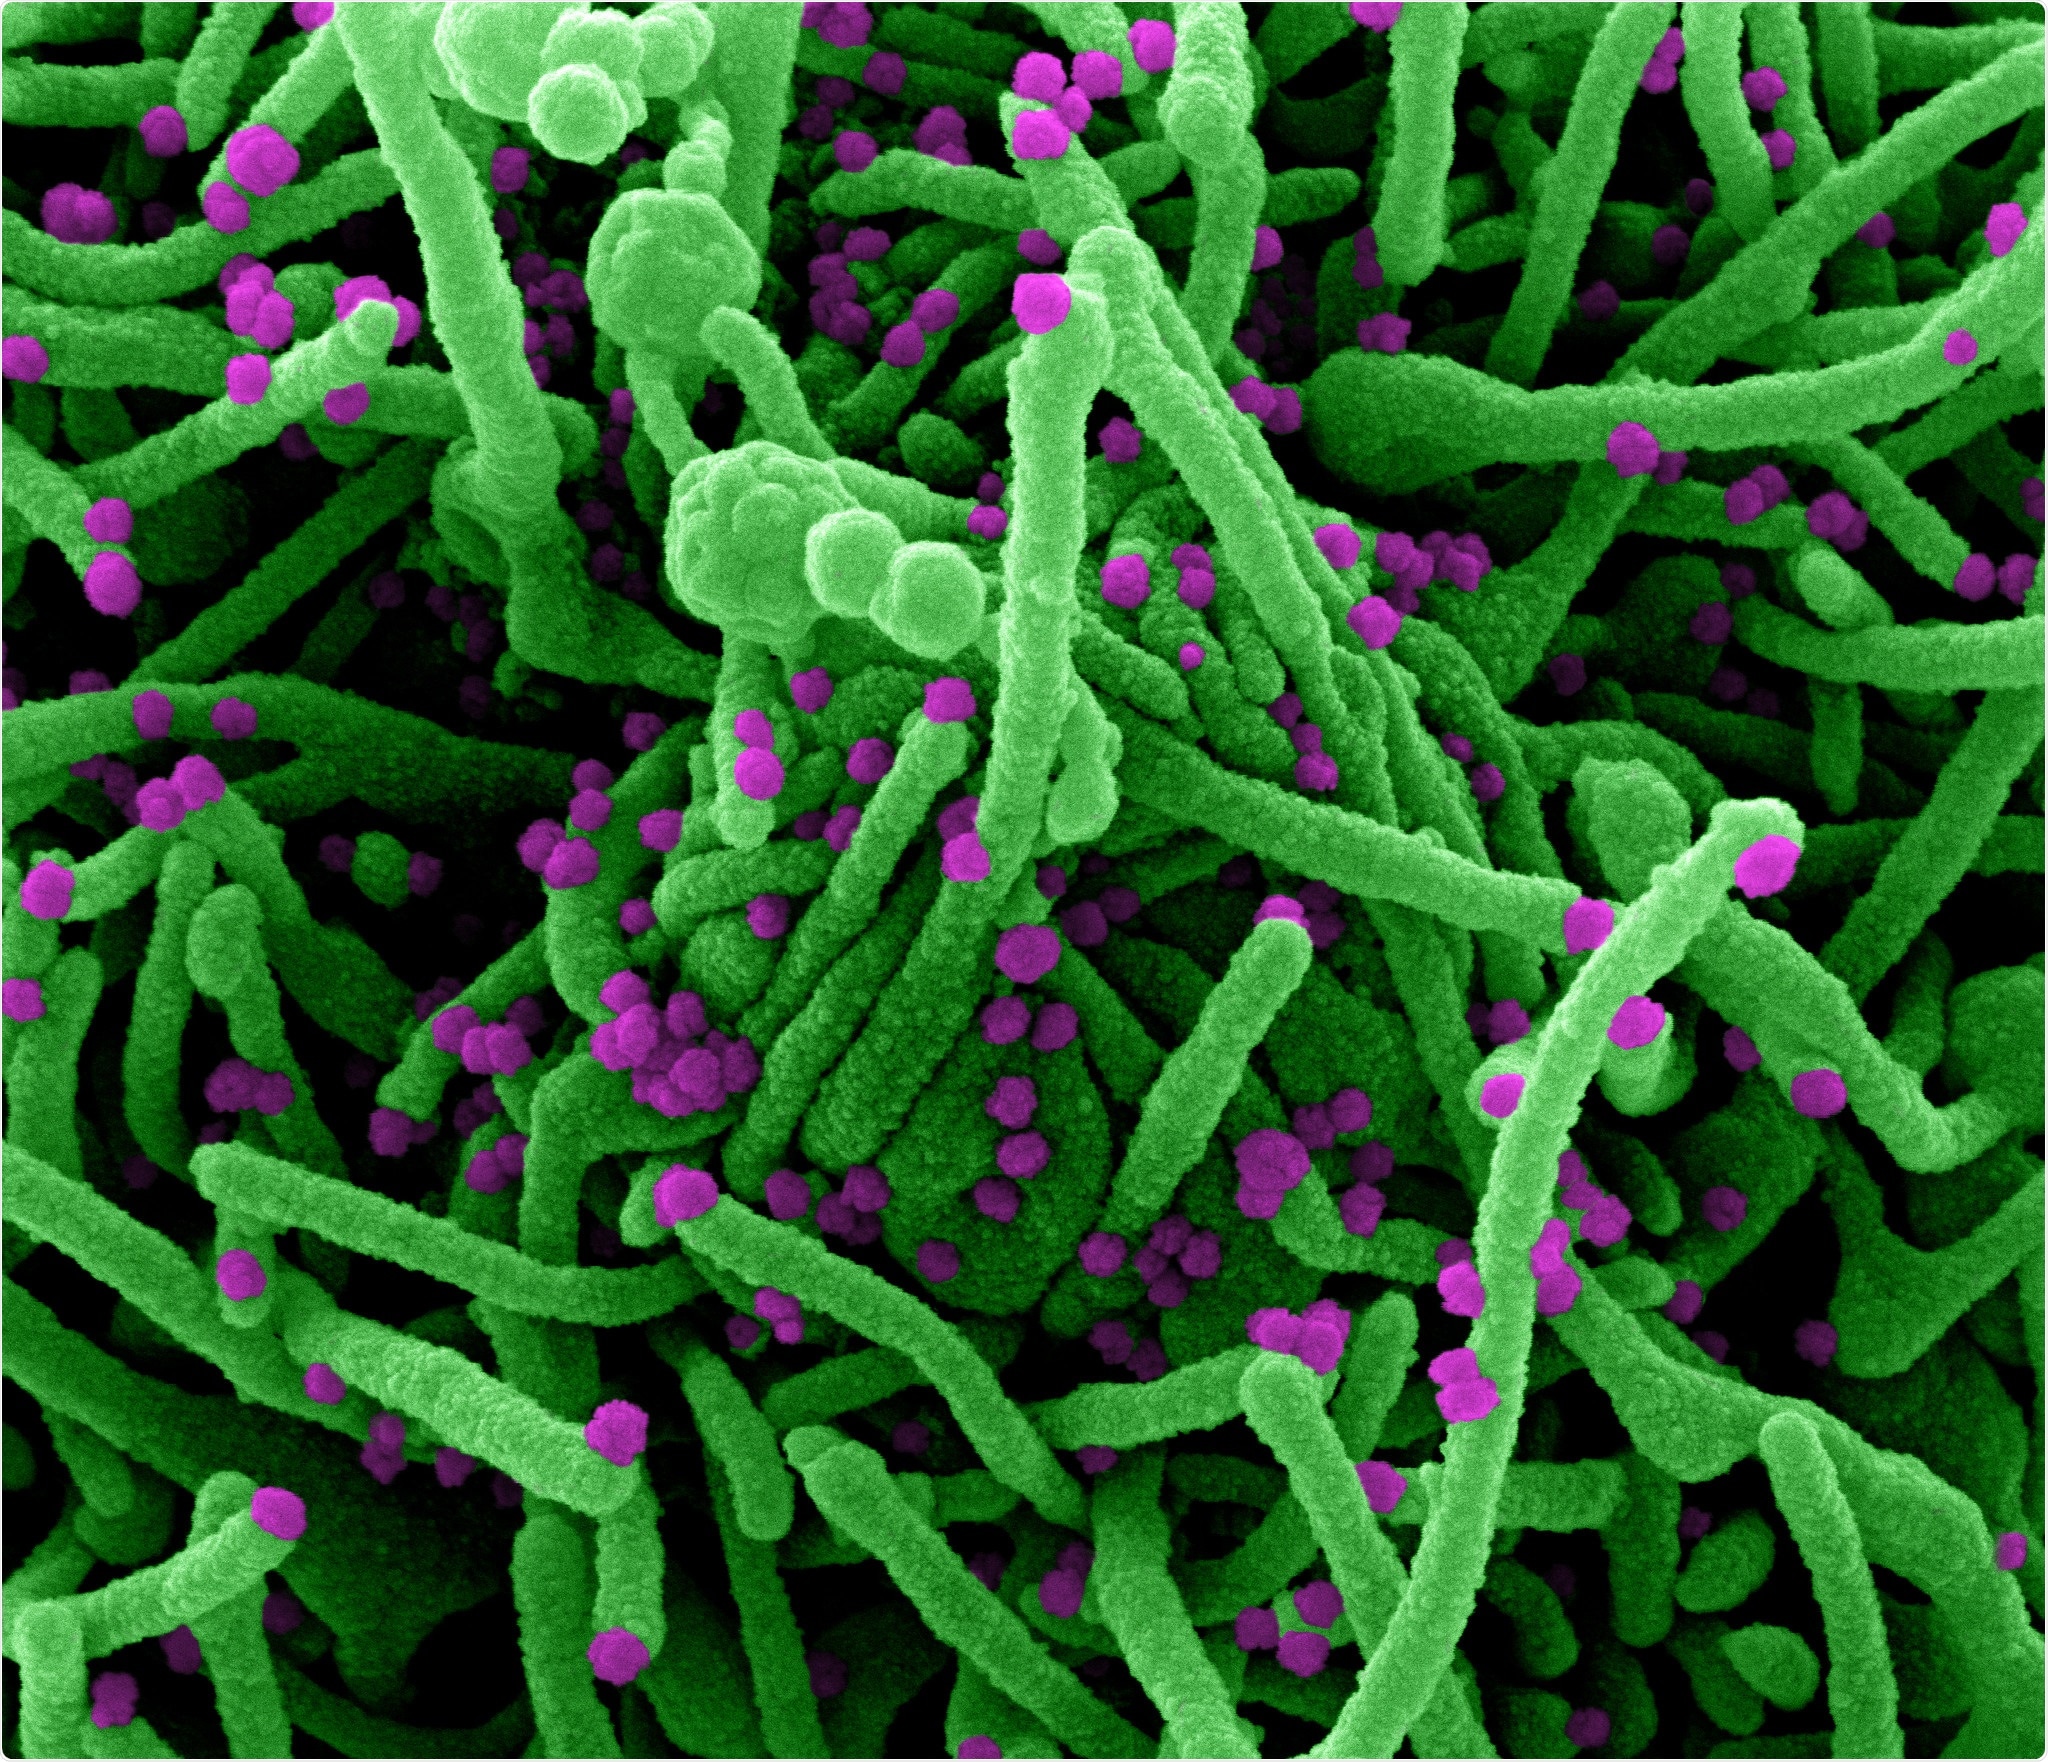 Colorized scanning electron micrograph of a cell (green) infected with SARS-CoV-2 virus particles (purple), isolated from a patient sample. Image captured at the NIAID Integrated Research Facility (IRF) in Fort Detrick, Maryland. Credit: NIAID